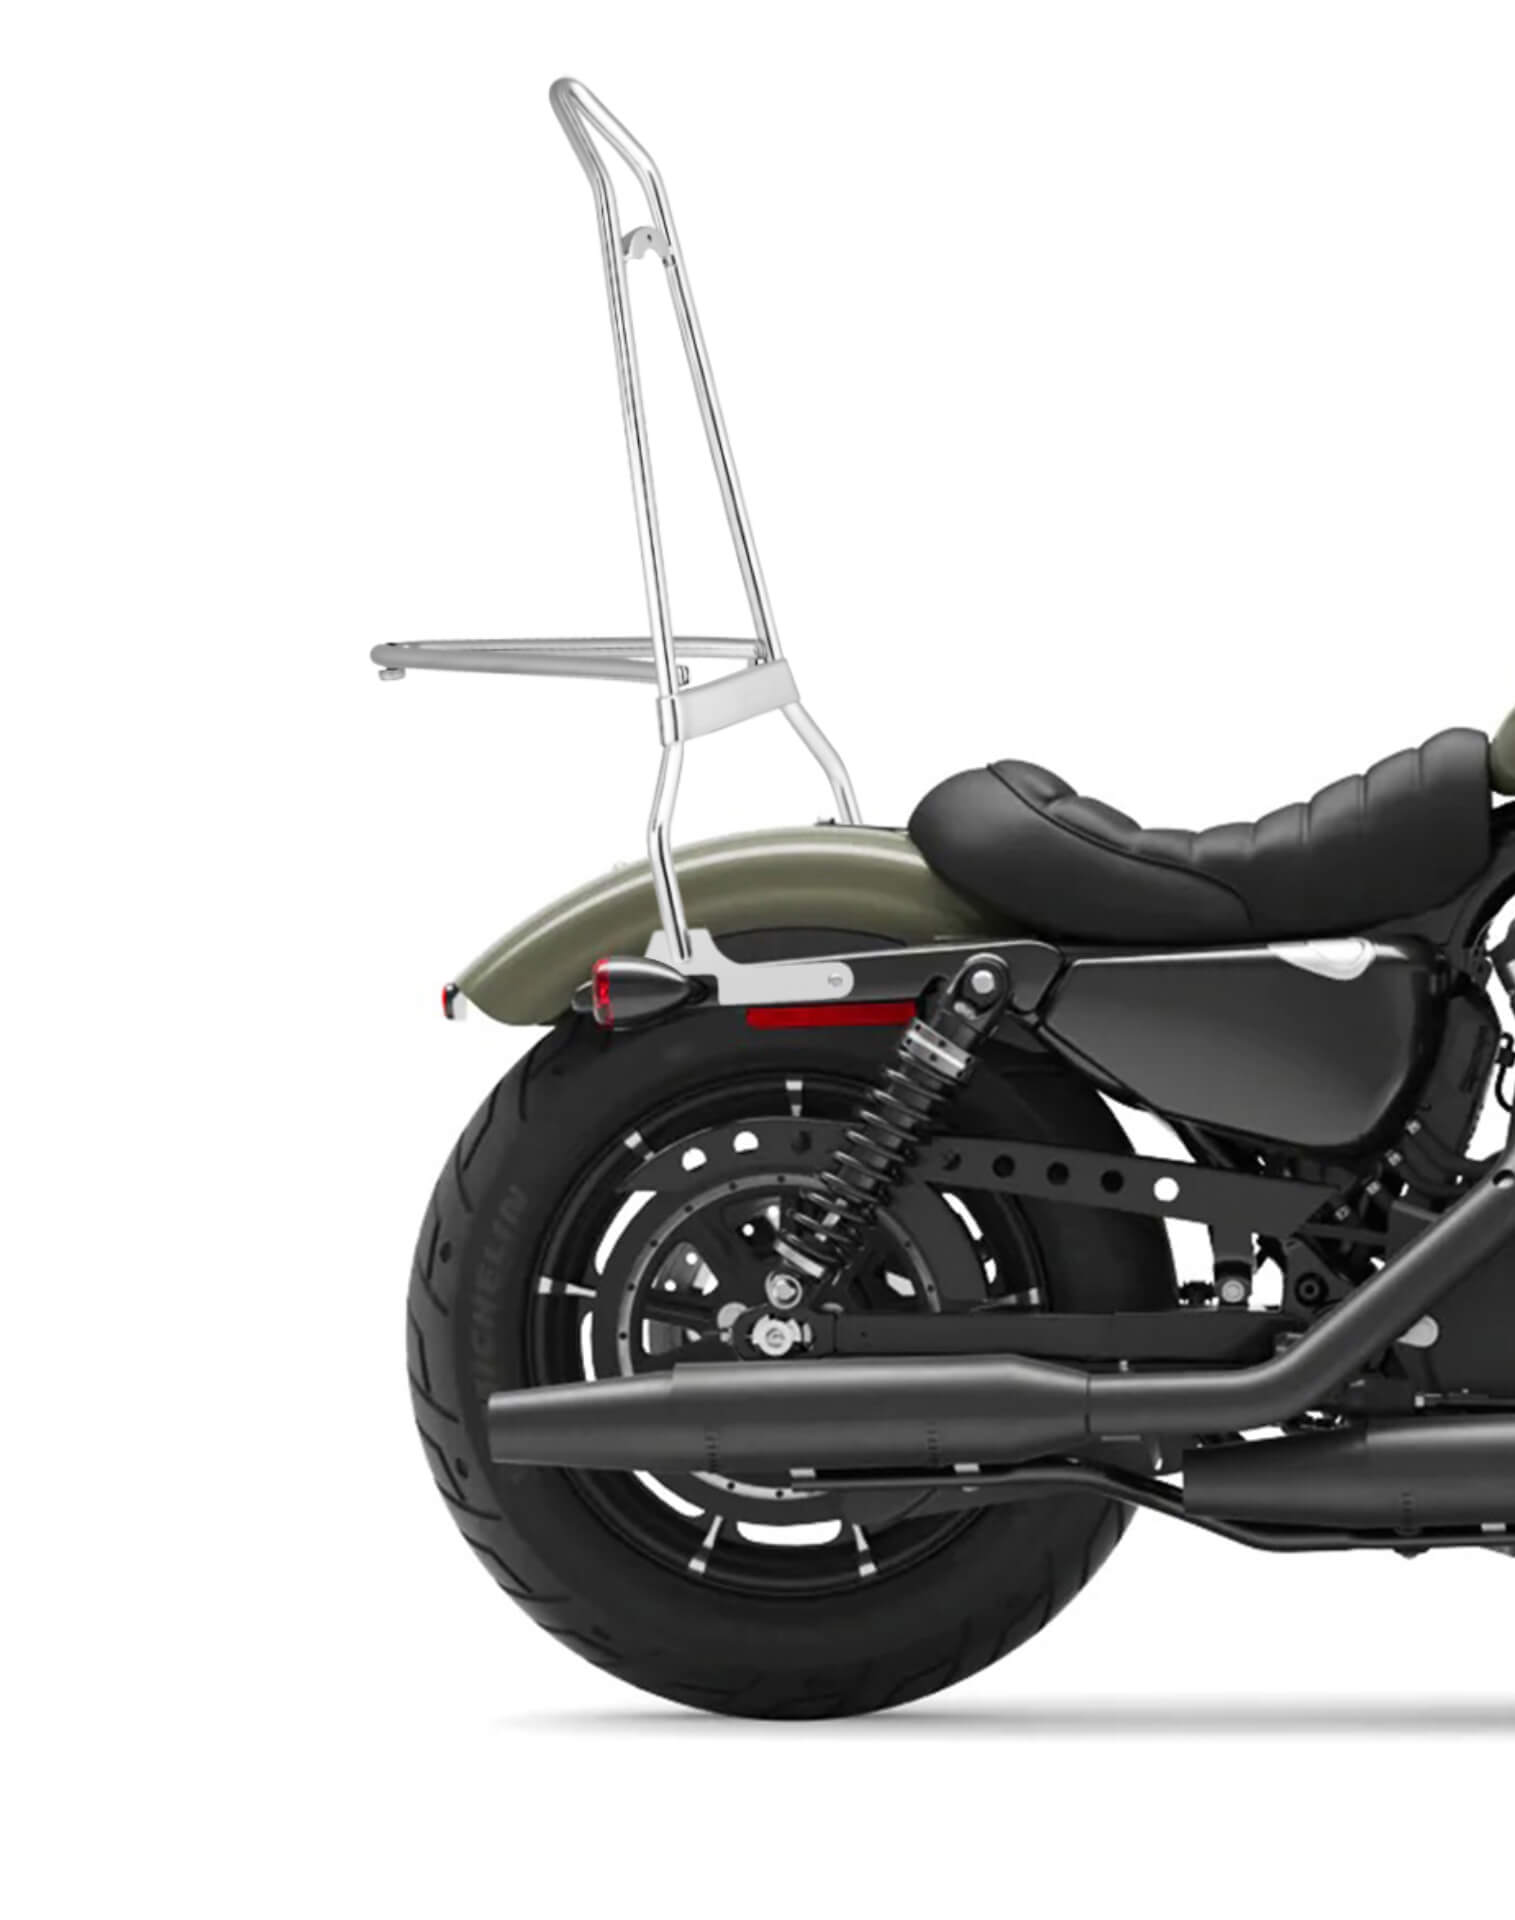 Iron Born Blade 25" Sissy Bar with Foldable Luggage Rack for Harley Sportster 883 Iron XL883N Chrome Close Up View